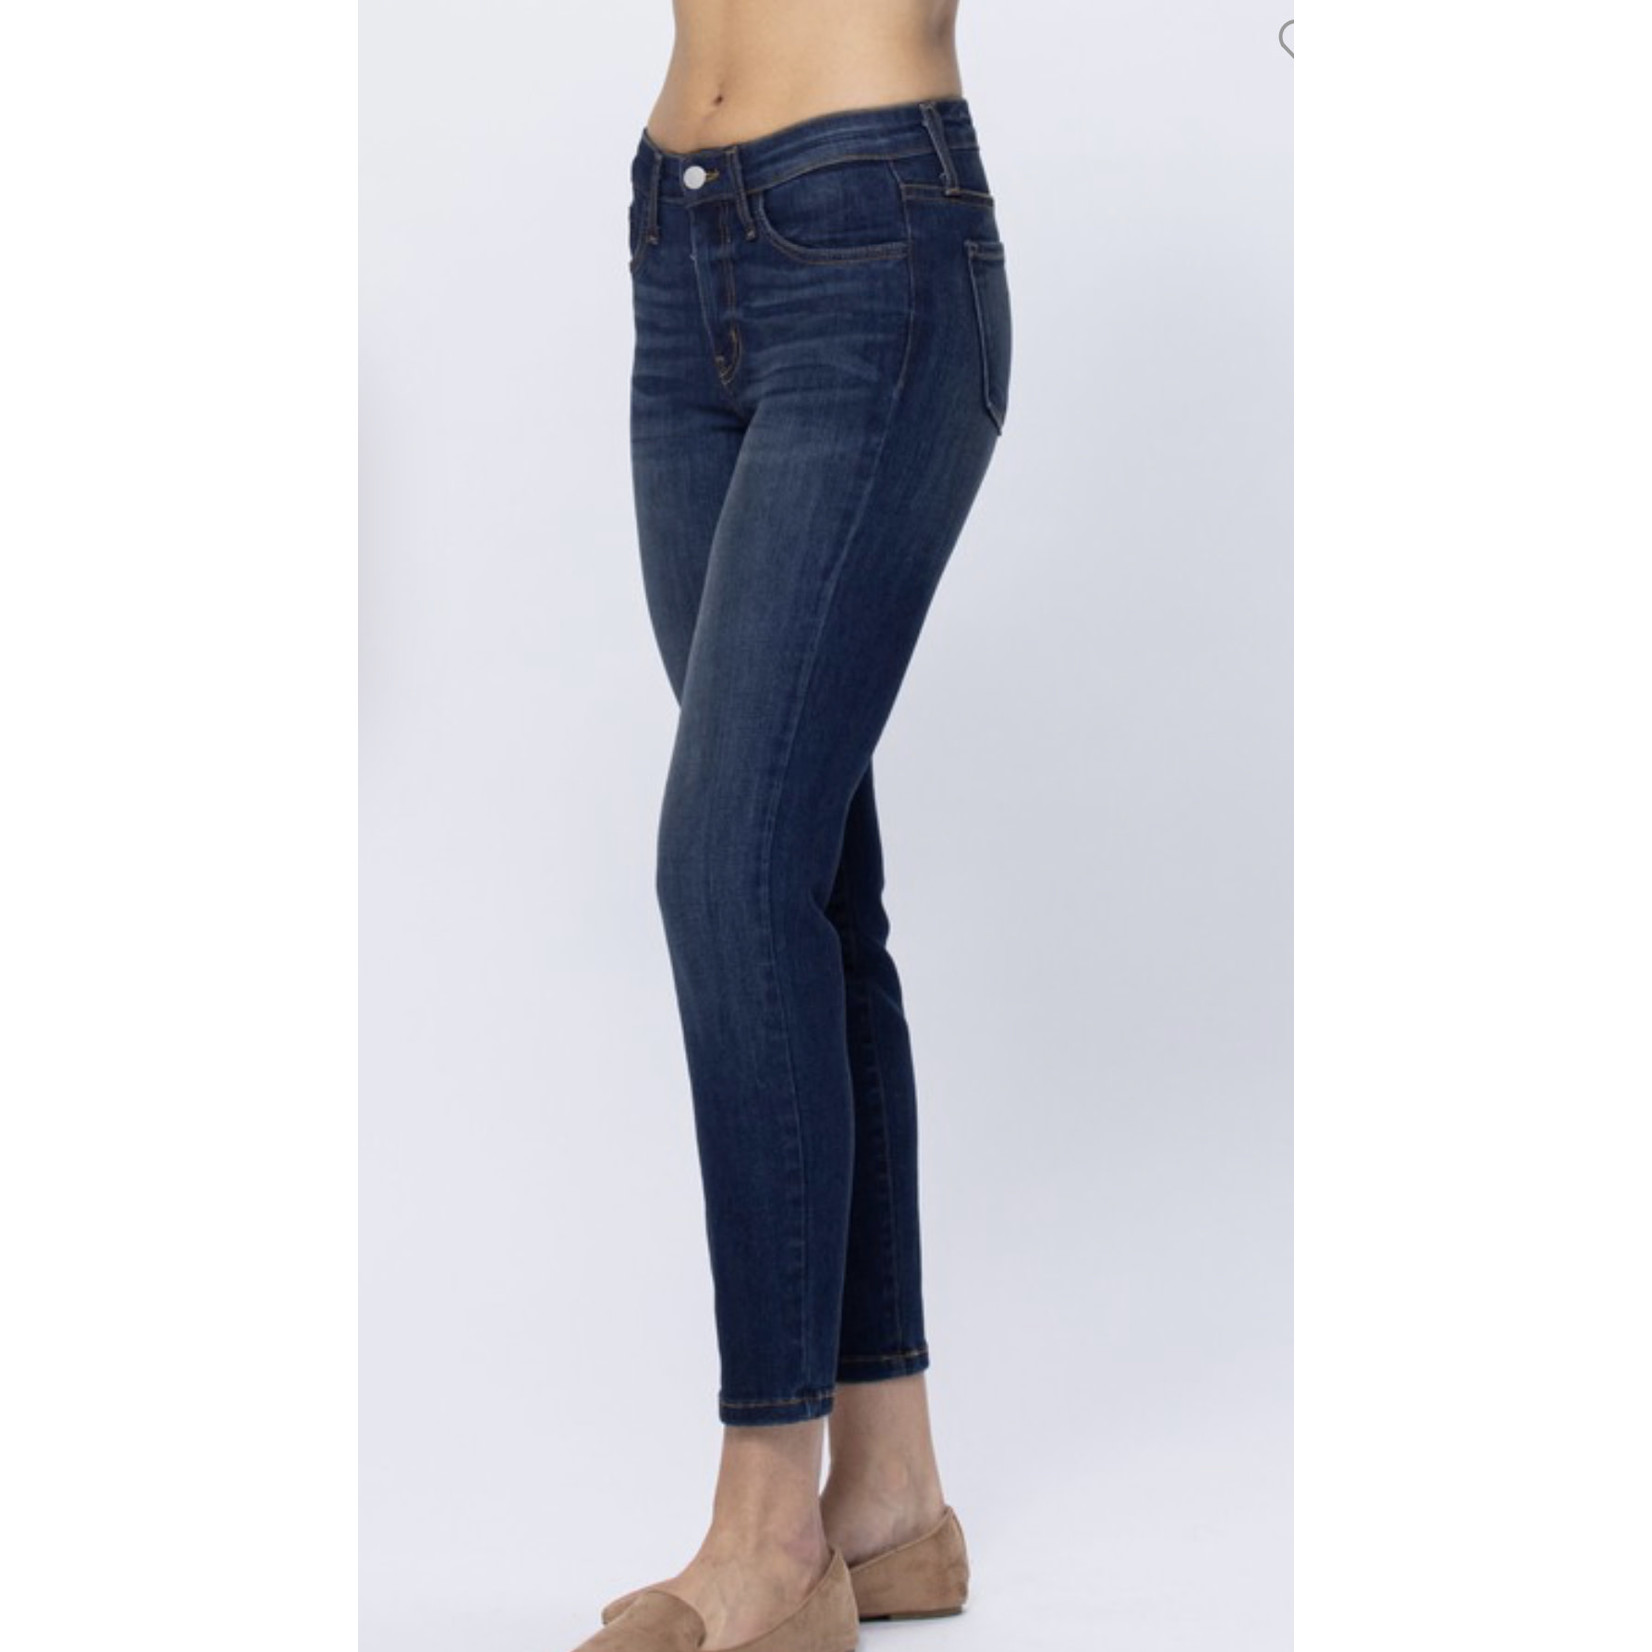 FashionGo / Judy Blue Handsand Relaxed Fit Judy Blue Jeans